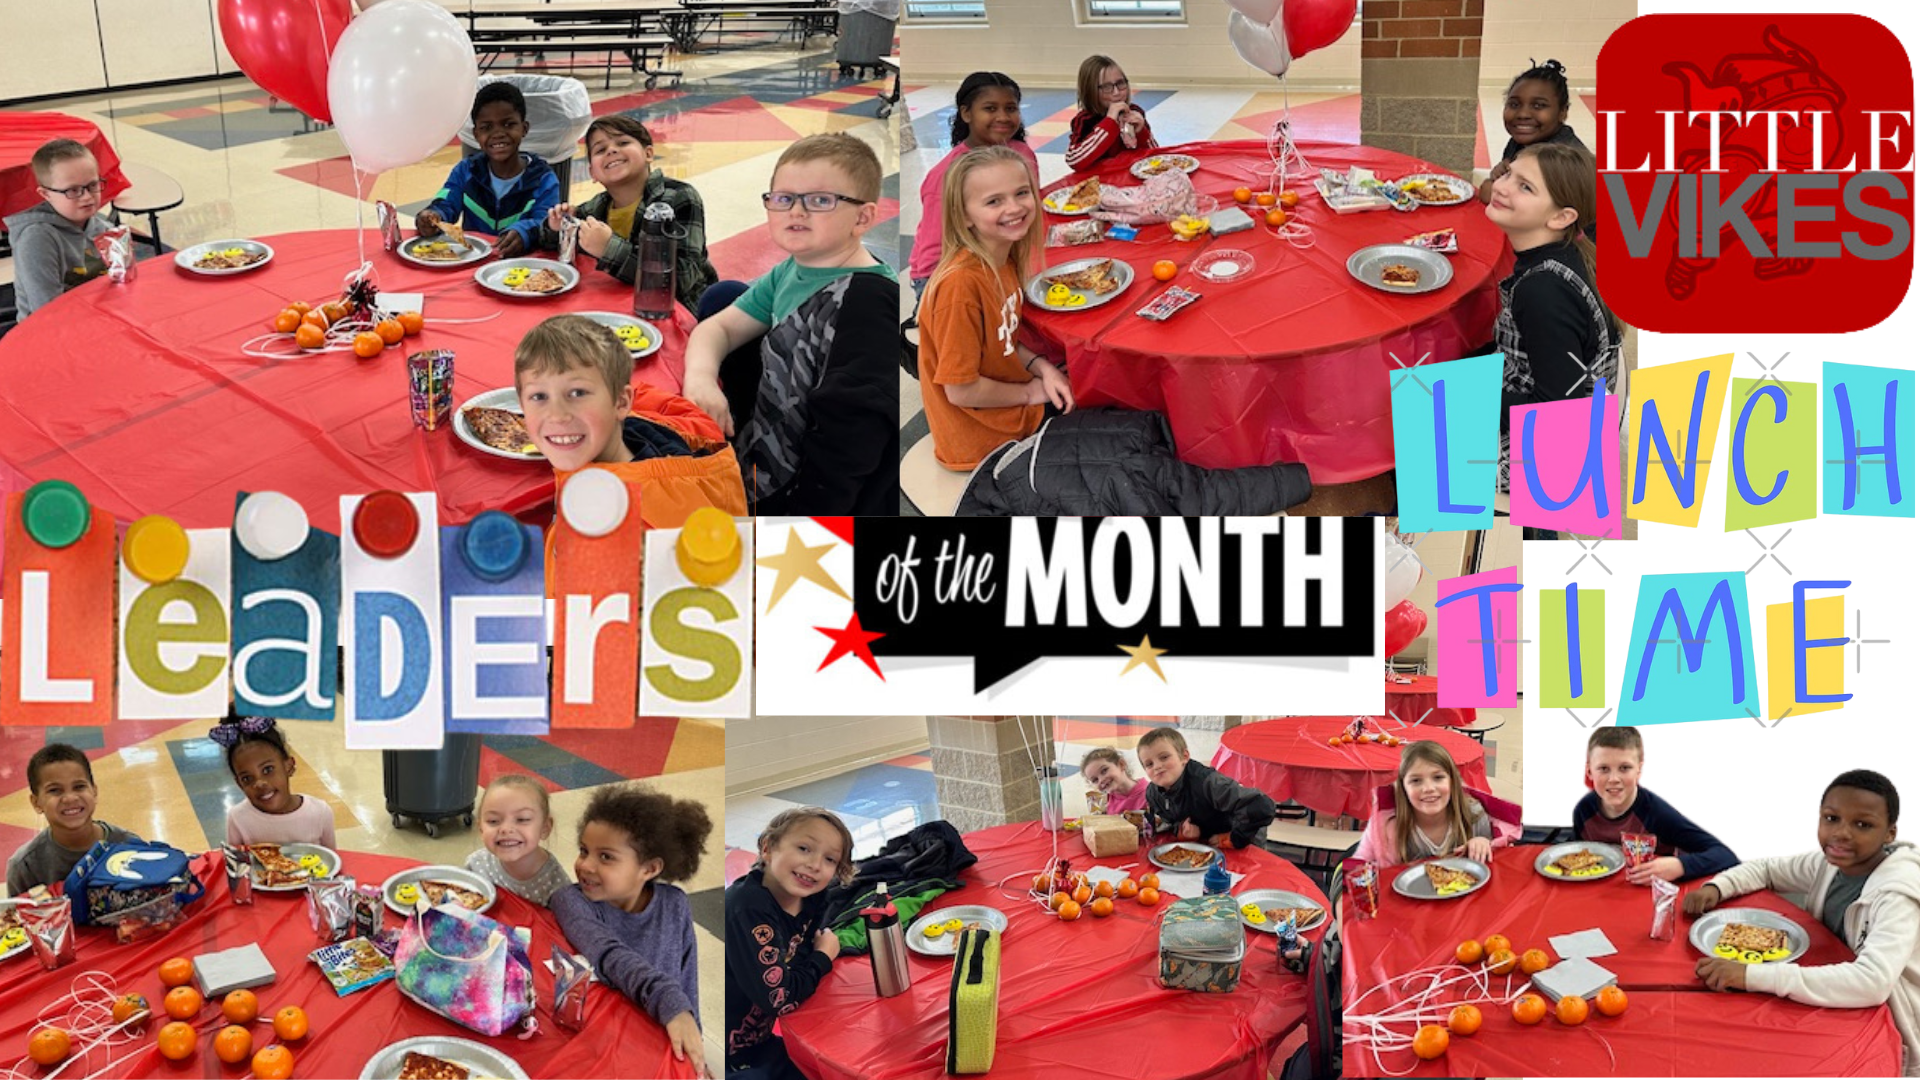 Leaders of the Month Lunch